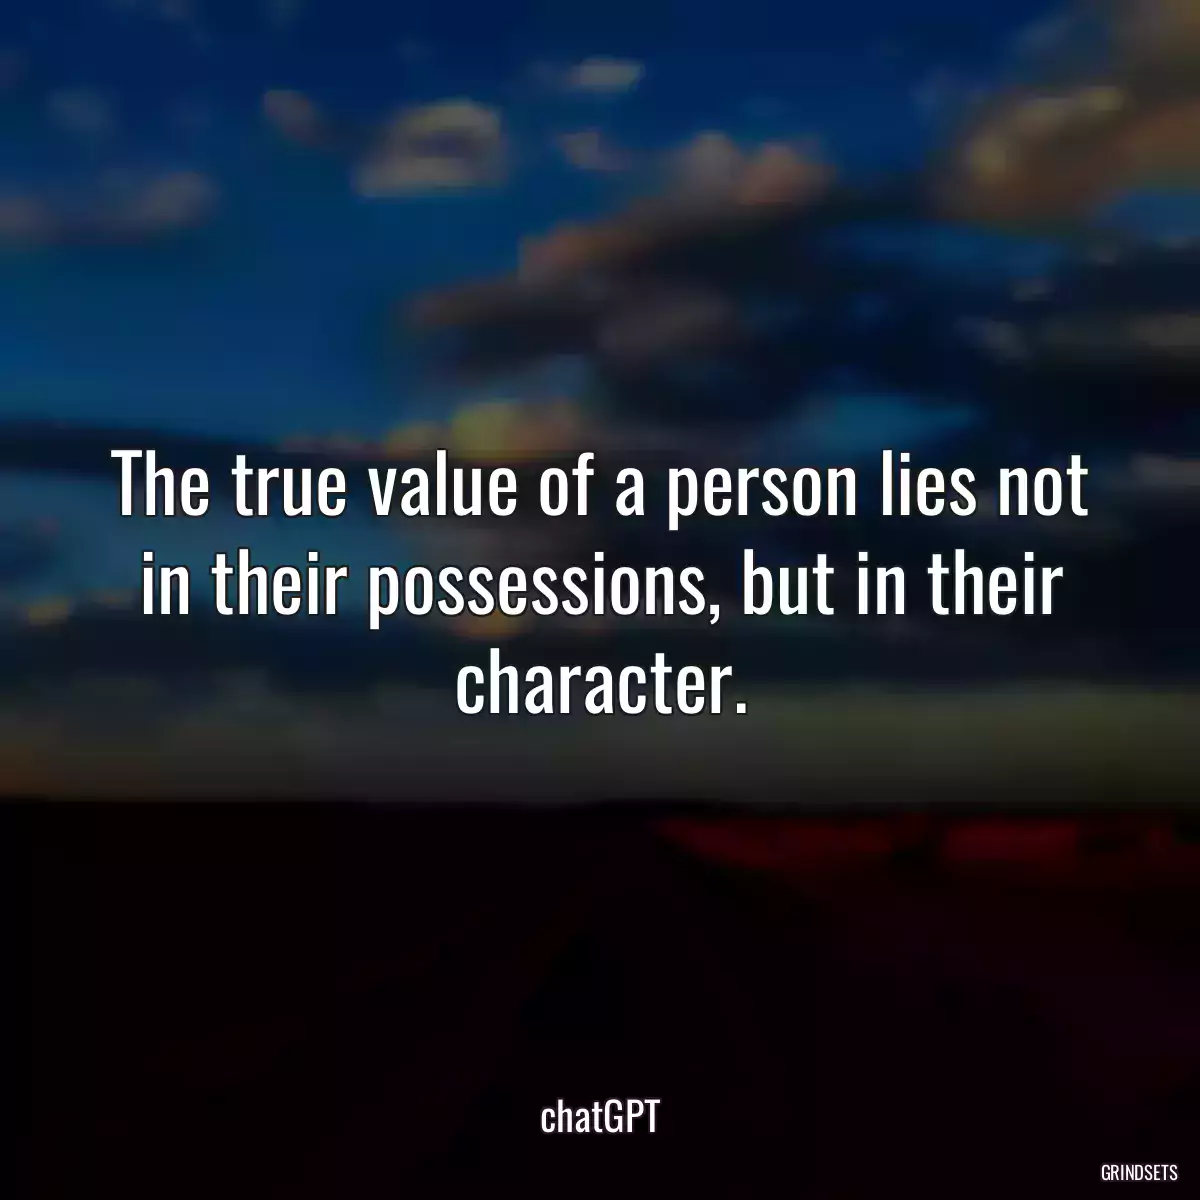 The true value of a person lies not in their possessions, but in their character.